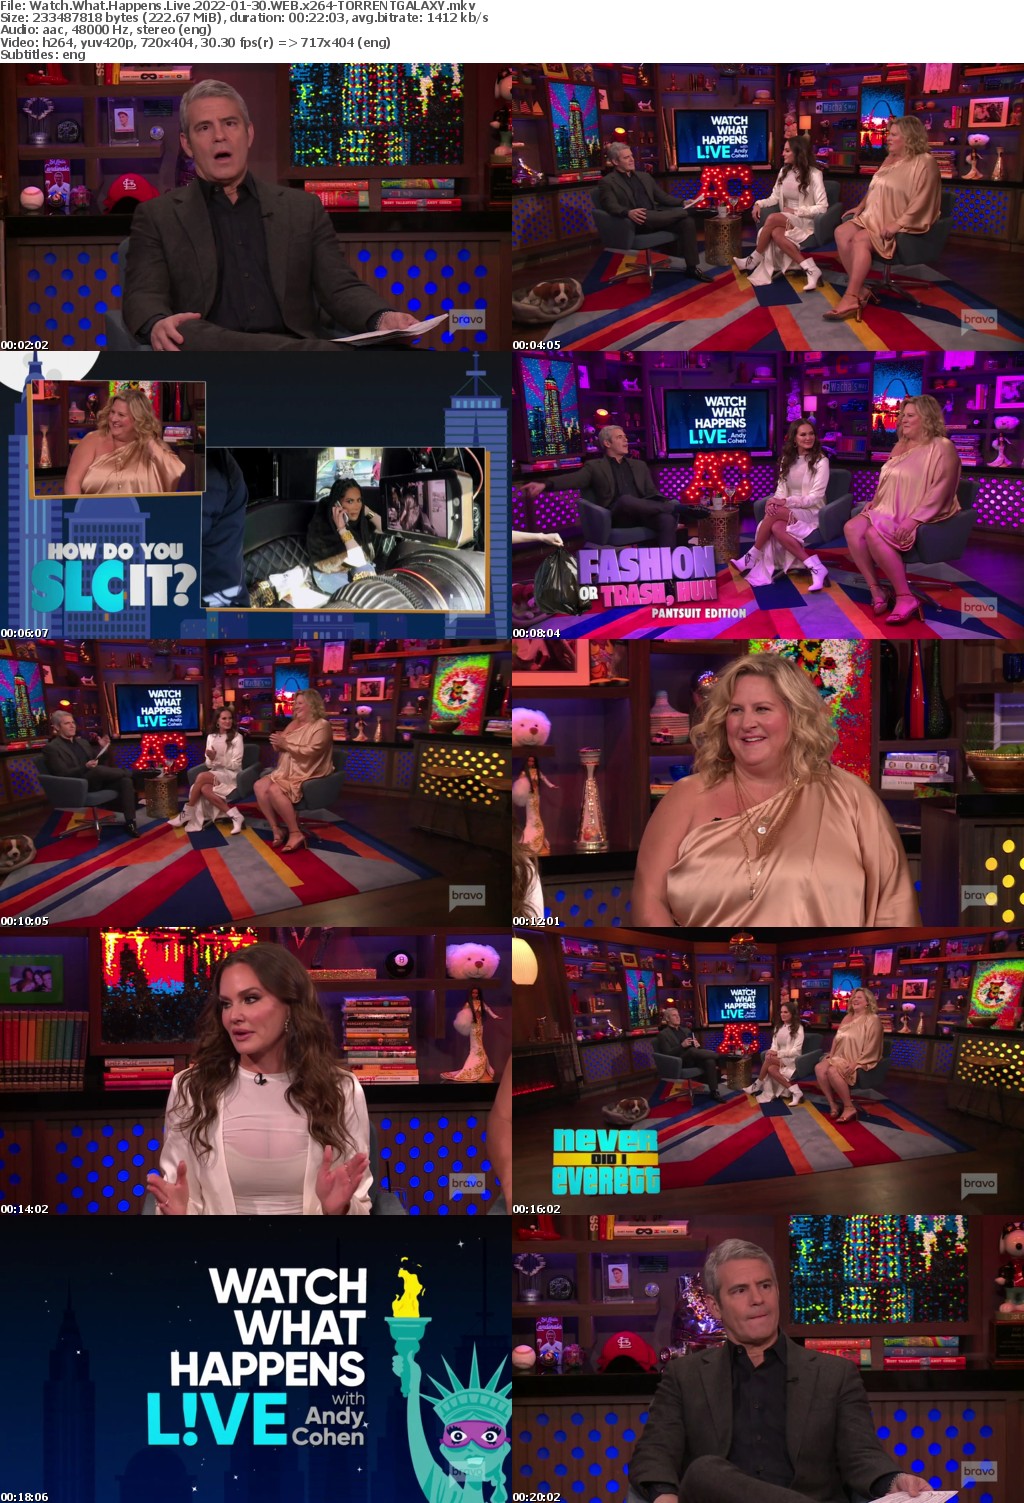 Watch What Happens Live 2022-01-30 WEB x264-GALAXY